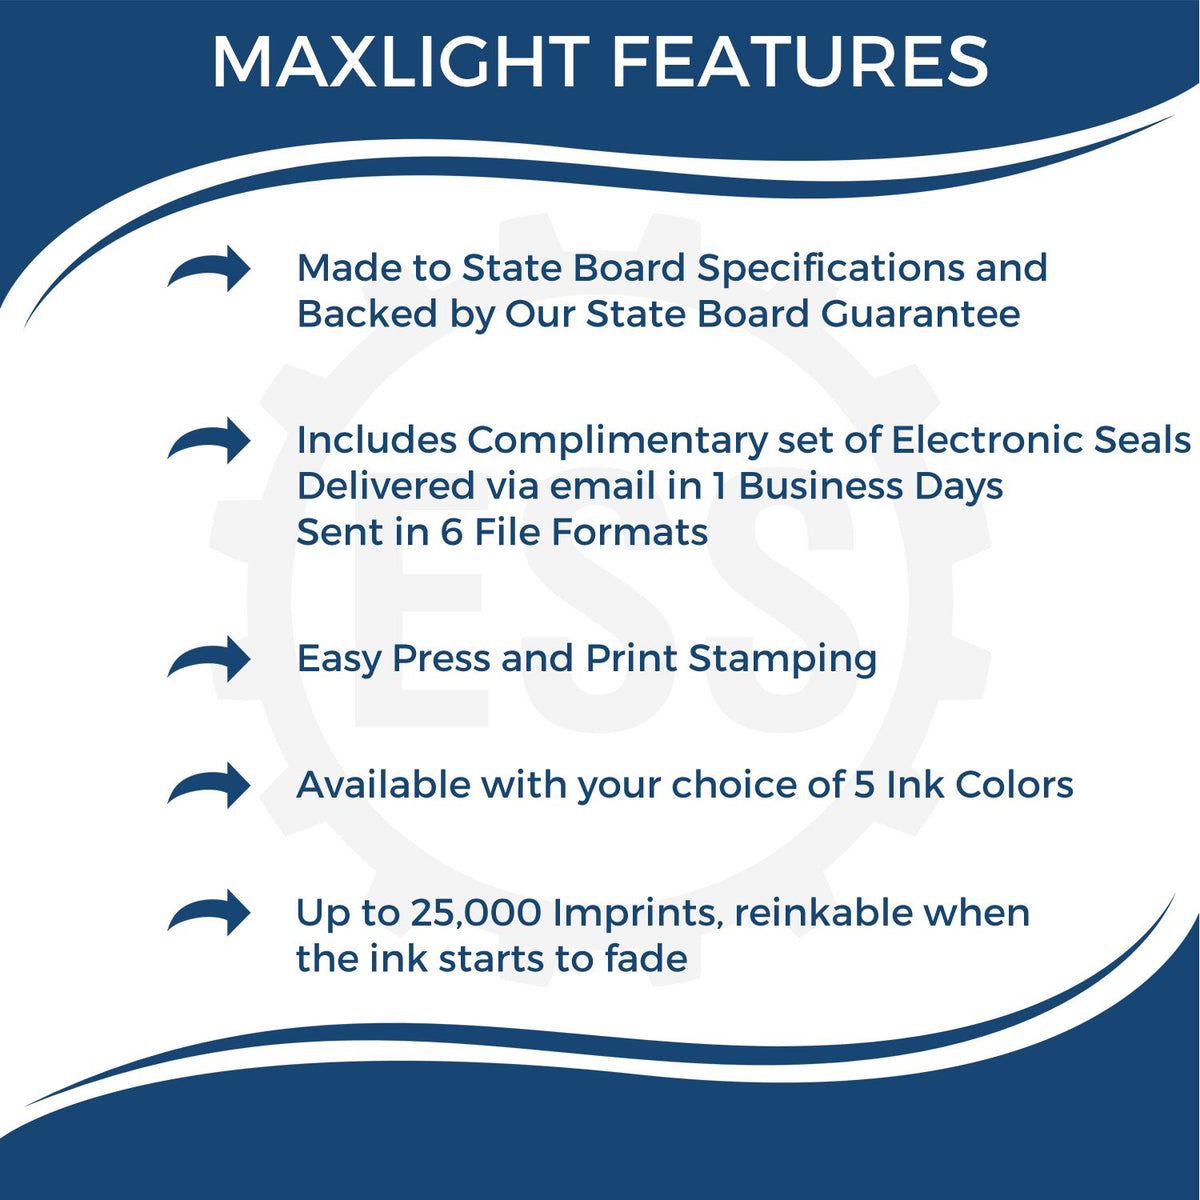 A picture of an infographic highlighting the selling points for the MaxLight Premium Pre-Inked New York State Seal Notarial Stamp